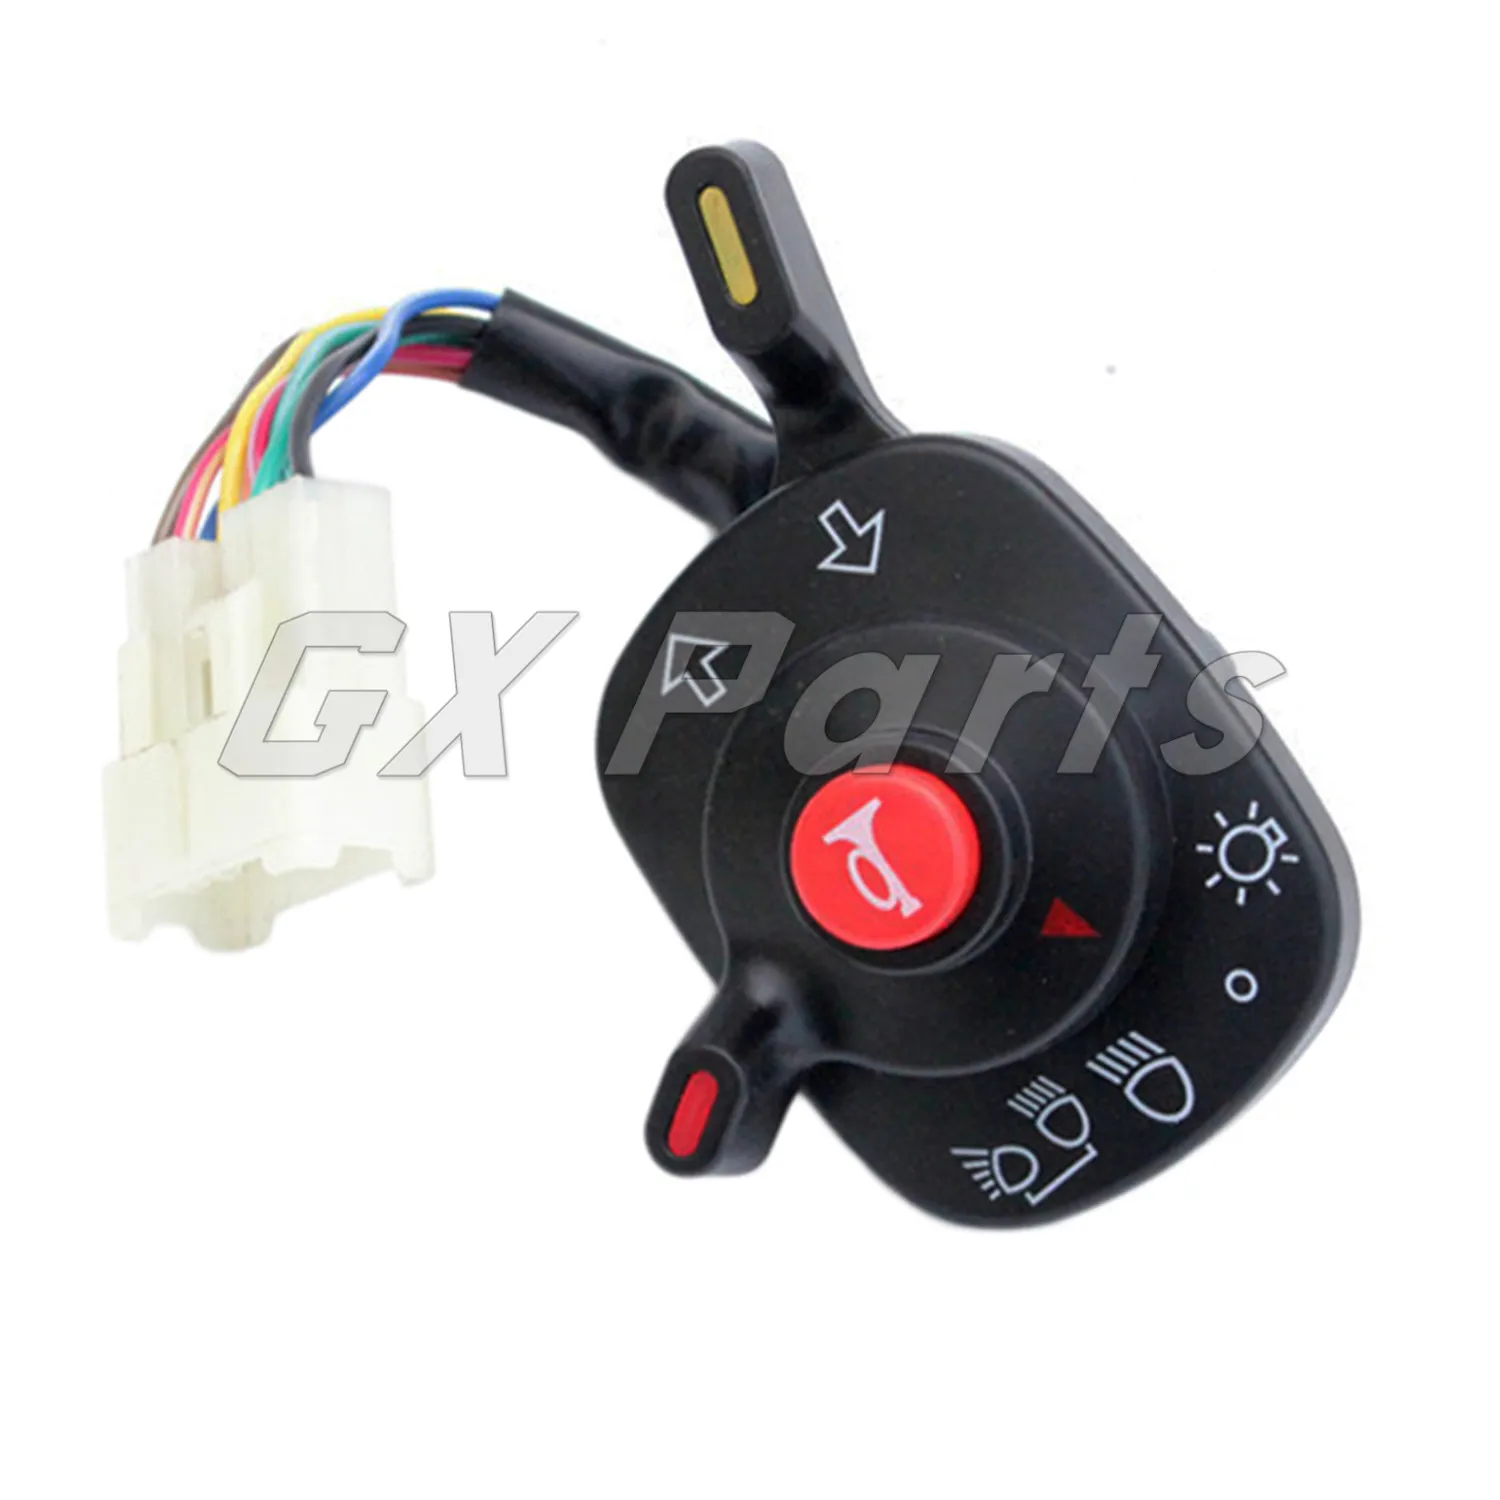 Notonparts 5T057-12242 5T057-42242 New Headlight Switch Compatible with Kubota 588I-G 688 759 888 Harvester RS19 